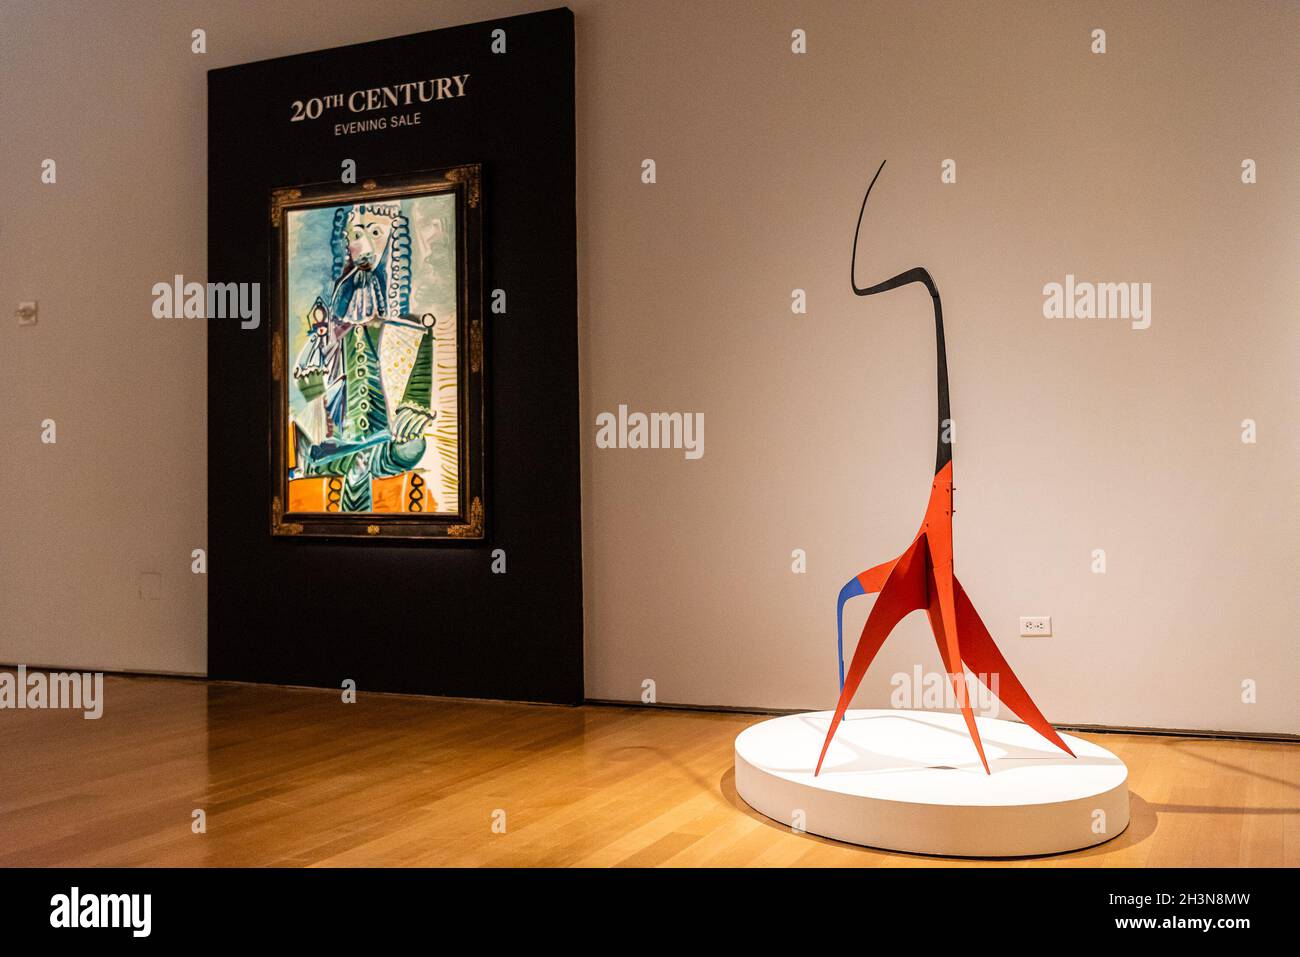 A painting by Pablo Picasso is part of the 20th/21st Century Evening Sales and The Cox Collection at Christie's in New York, New York on Oct. 29, 2021. (Photo by Gabriele Holtermann/Sipa USA) Stock Photo